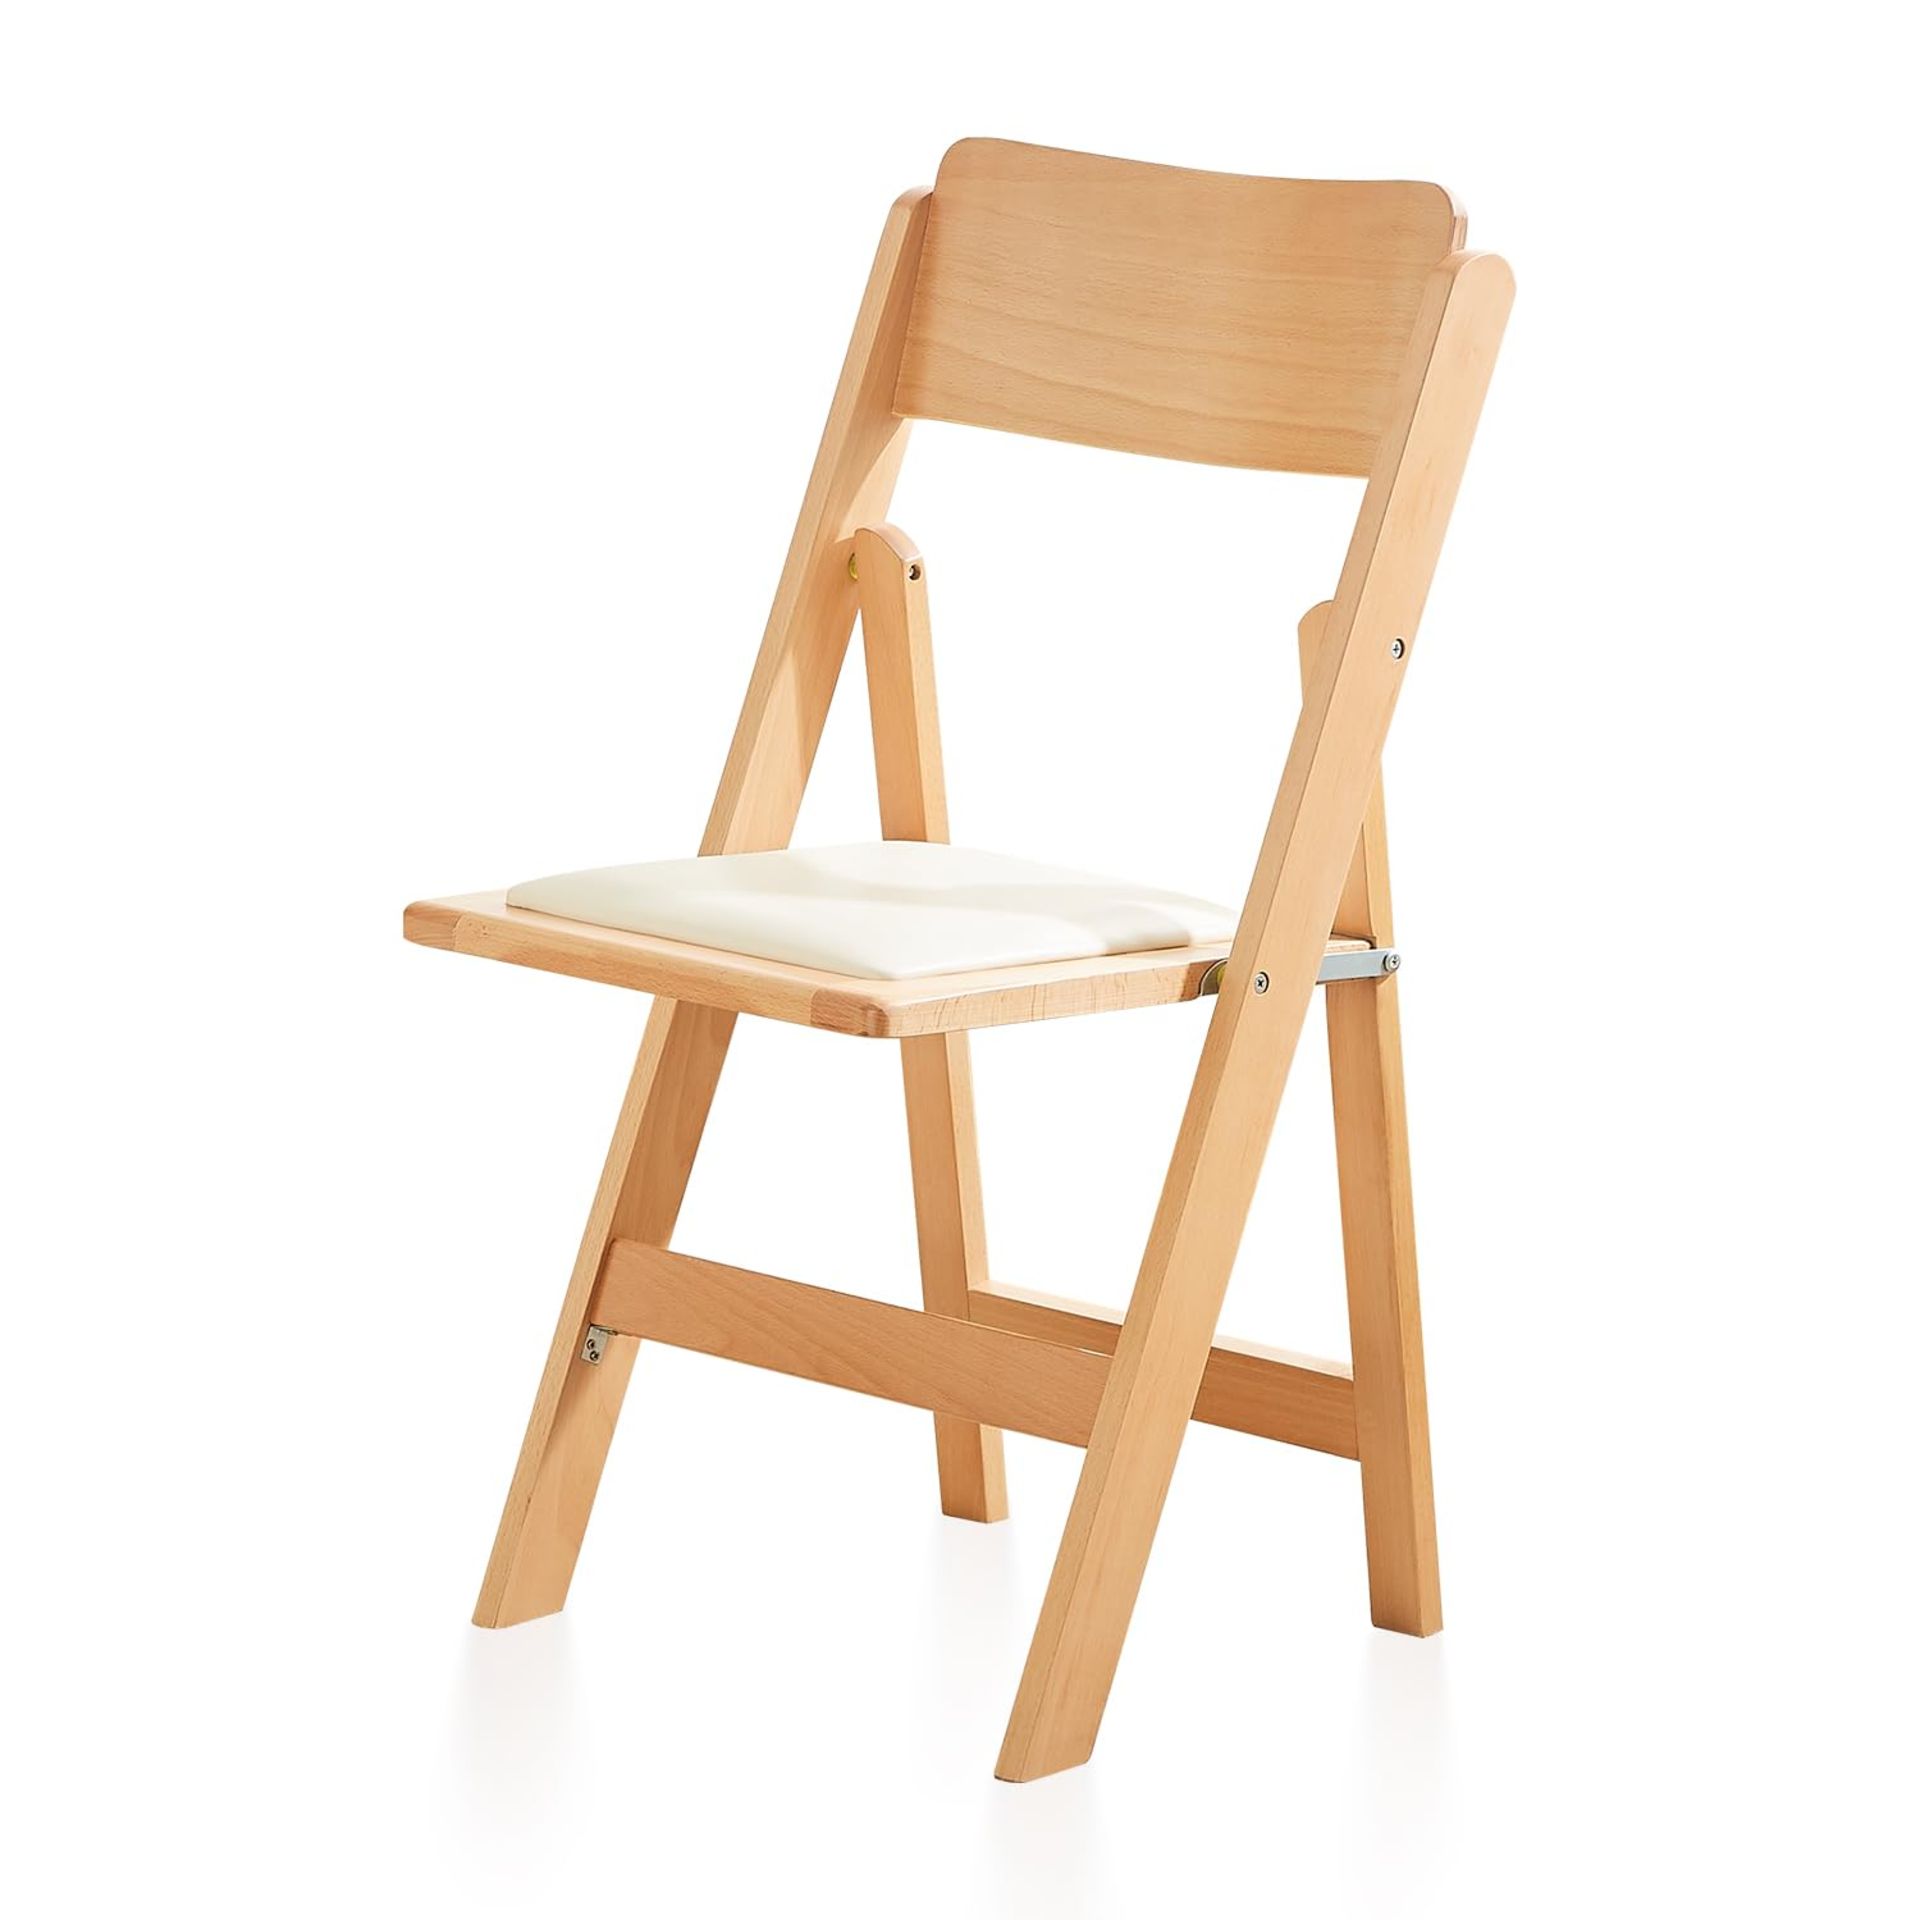 RRP £101.61 KAIHAOWIN Natural Beech Wood Folding Chair with Soft PU Cushion Seat